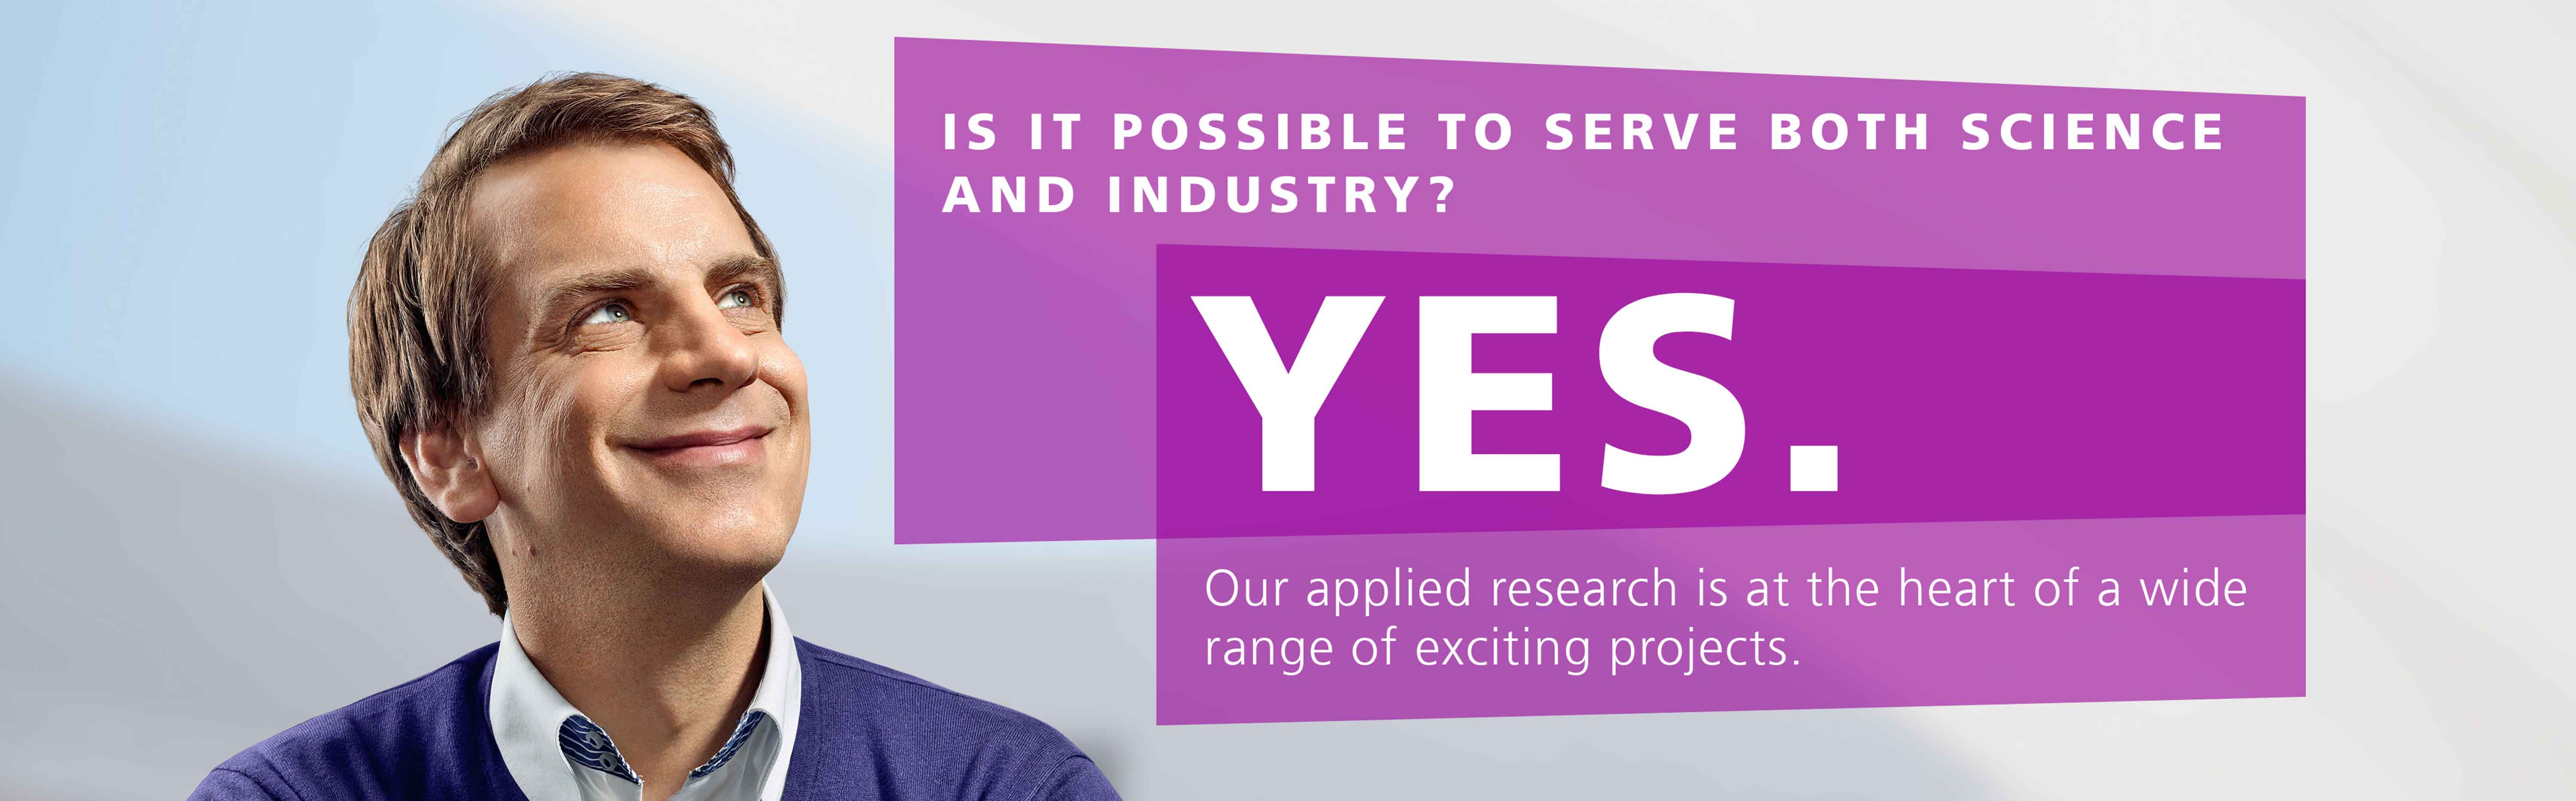 Here you can see our slogan: Is it impossible to serve both science and industry? YES!